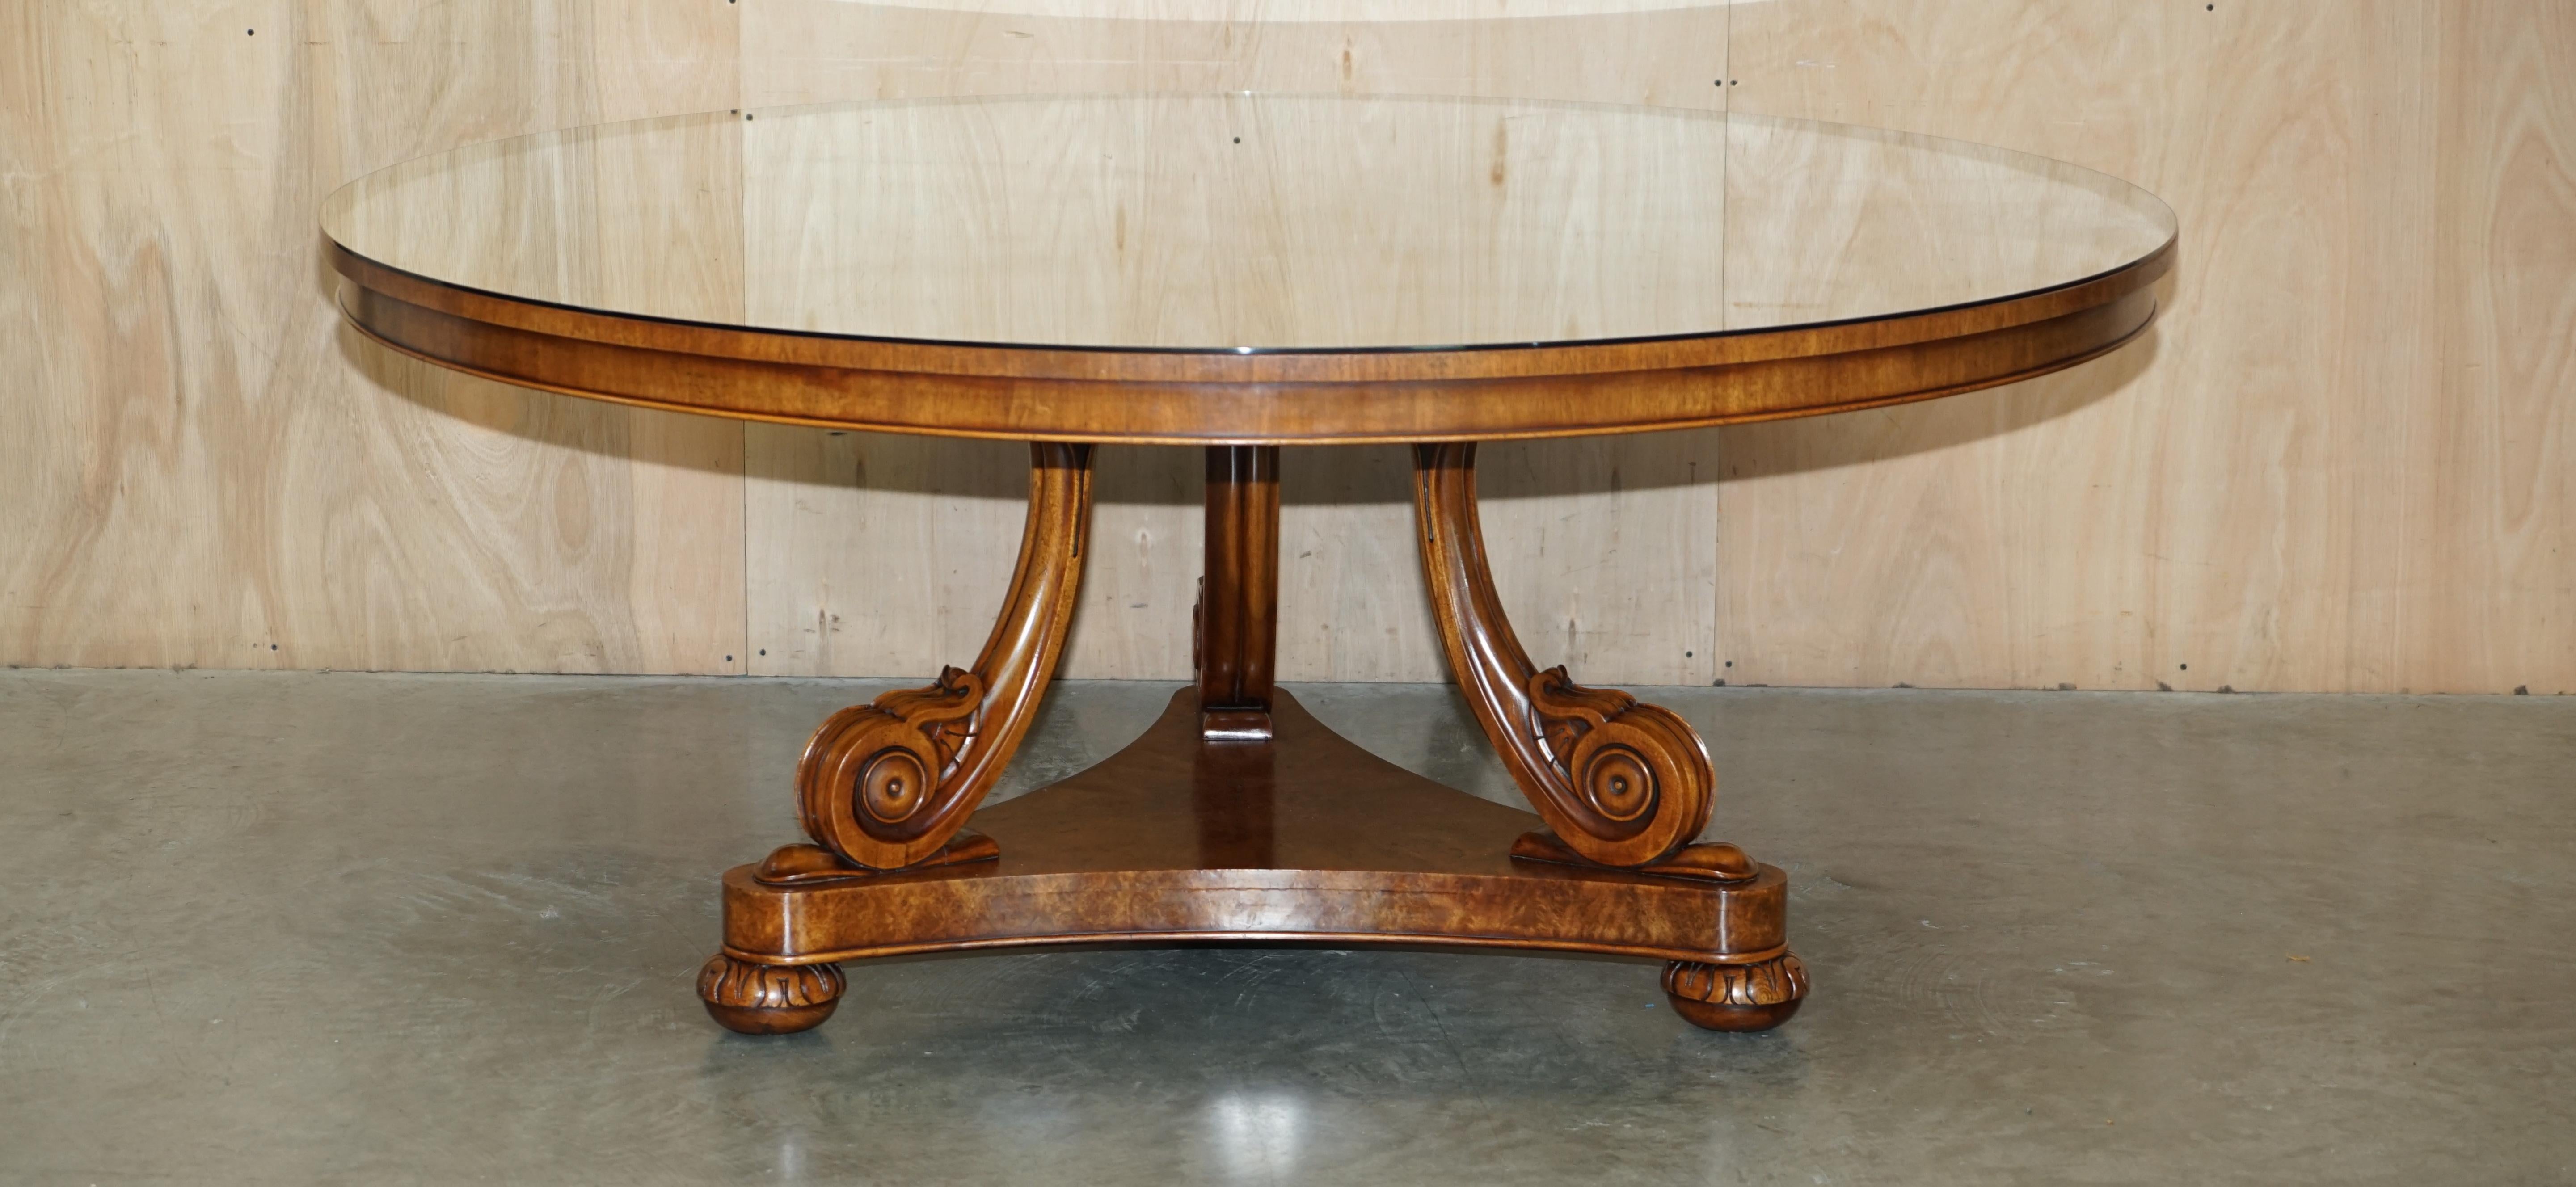 We are delighted to offer for sale this absolutely exquisite, Regency style, large round dining or huge centre table made with wonderful rich cuts of Burr Walnut, Mahogany & Satinwood

A truly sublime table, this is firstly very large, it seats